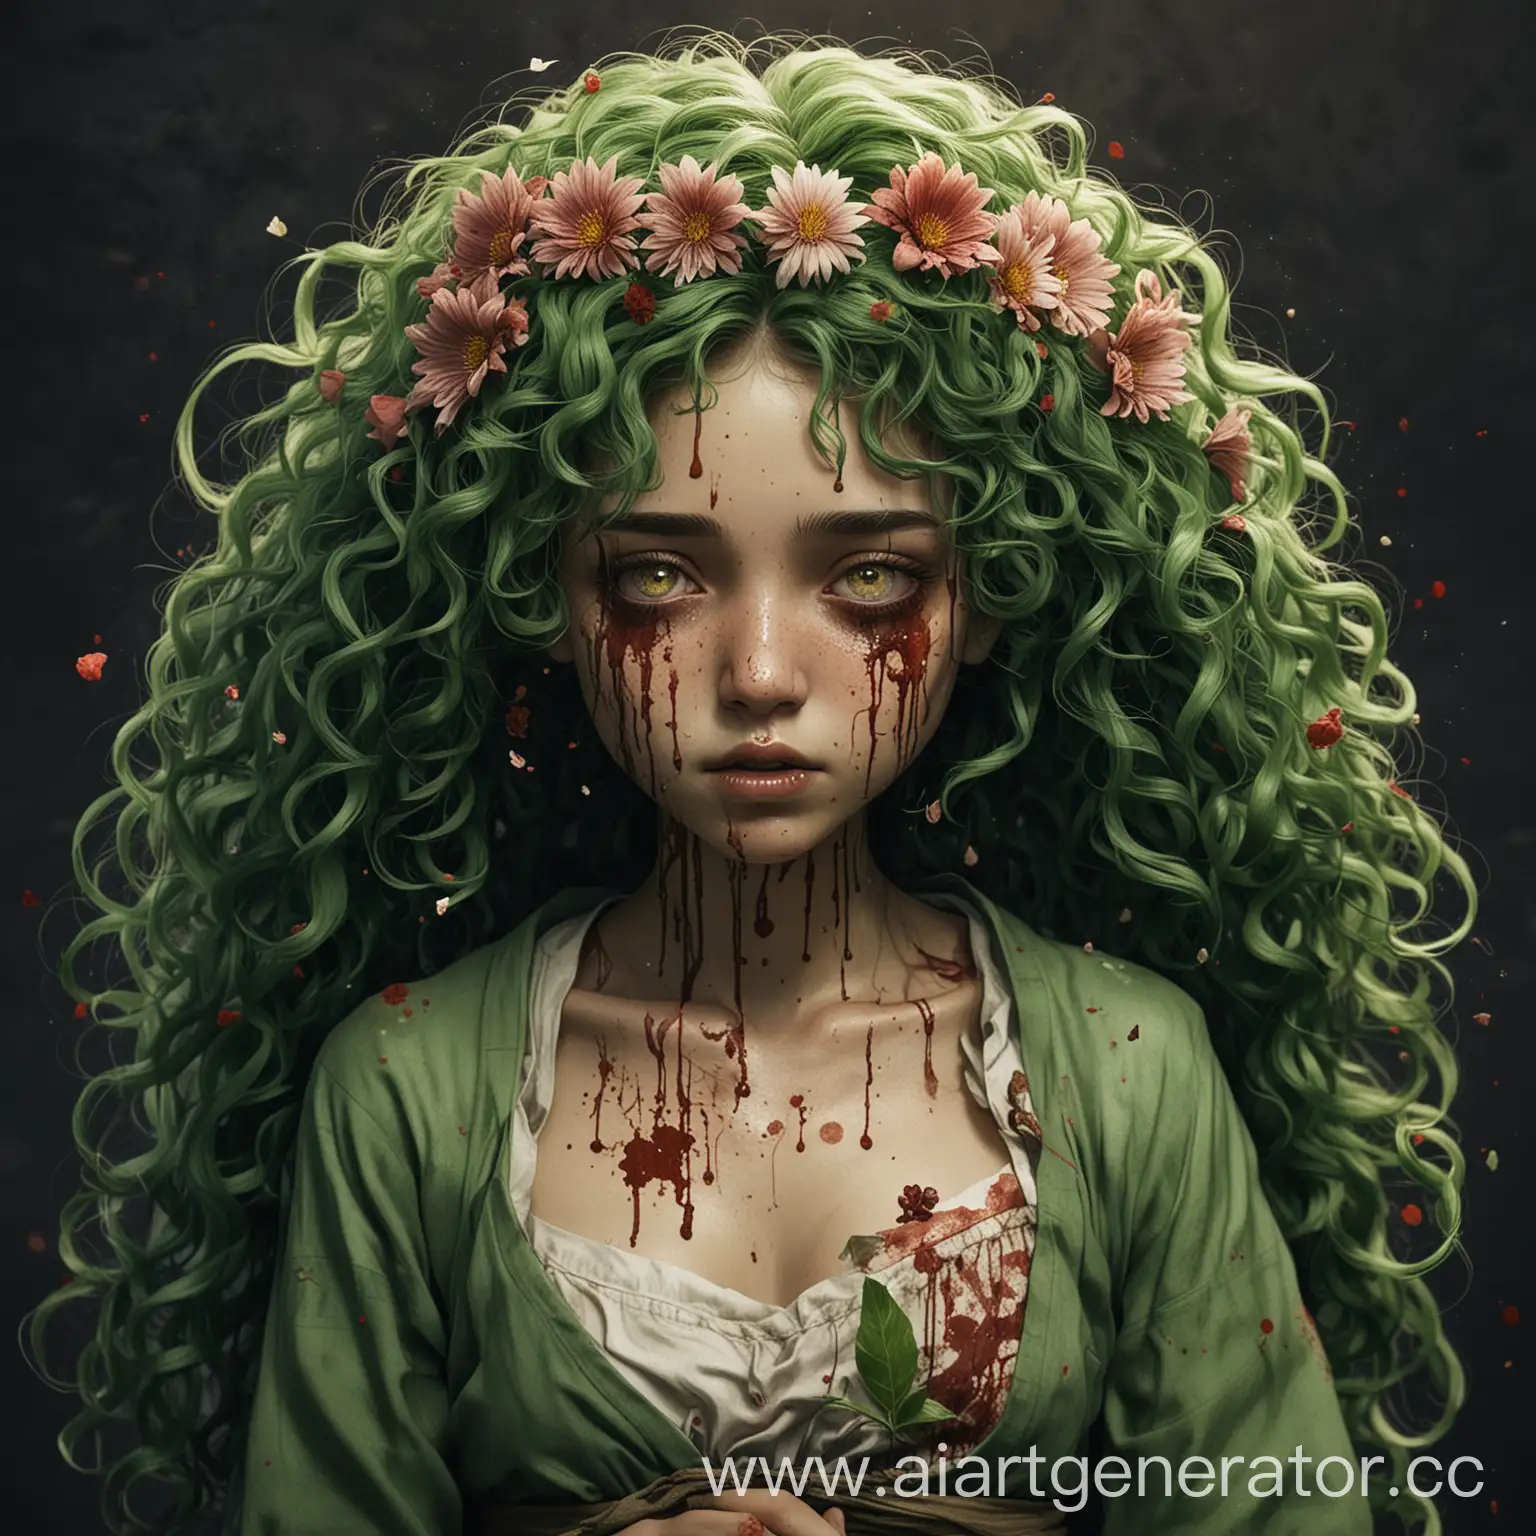 Hanahaki-Syndrome-Girl-with-Green-Curly-Hair-Vomiting-Blood-and-Flowers